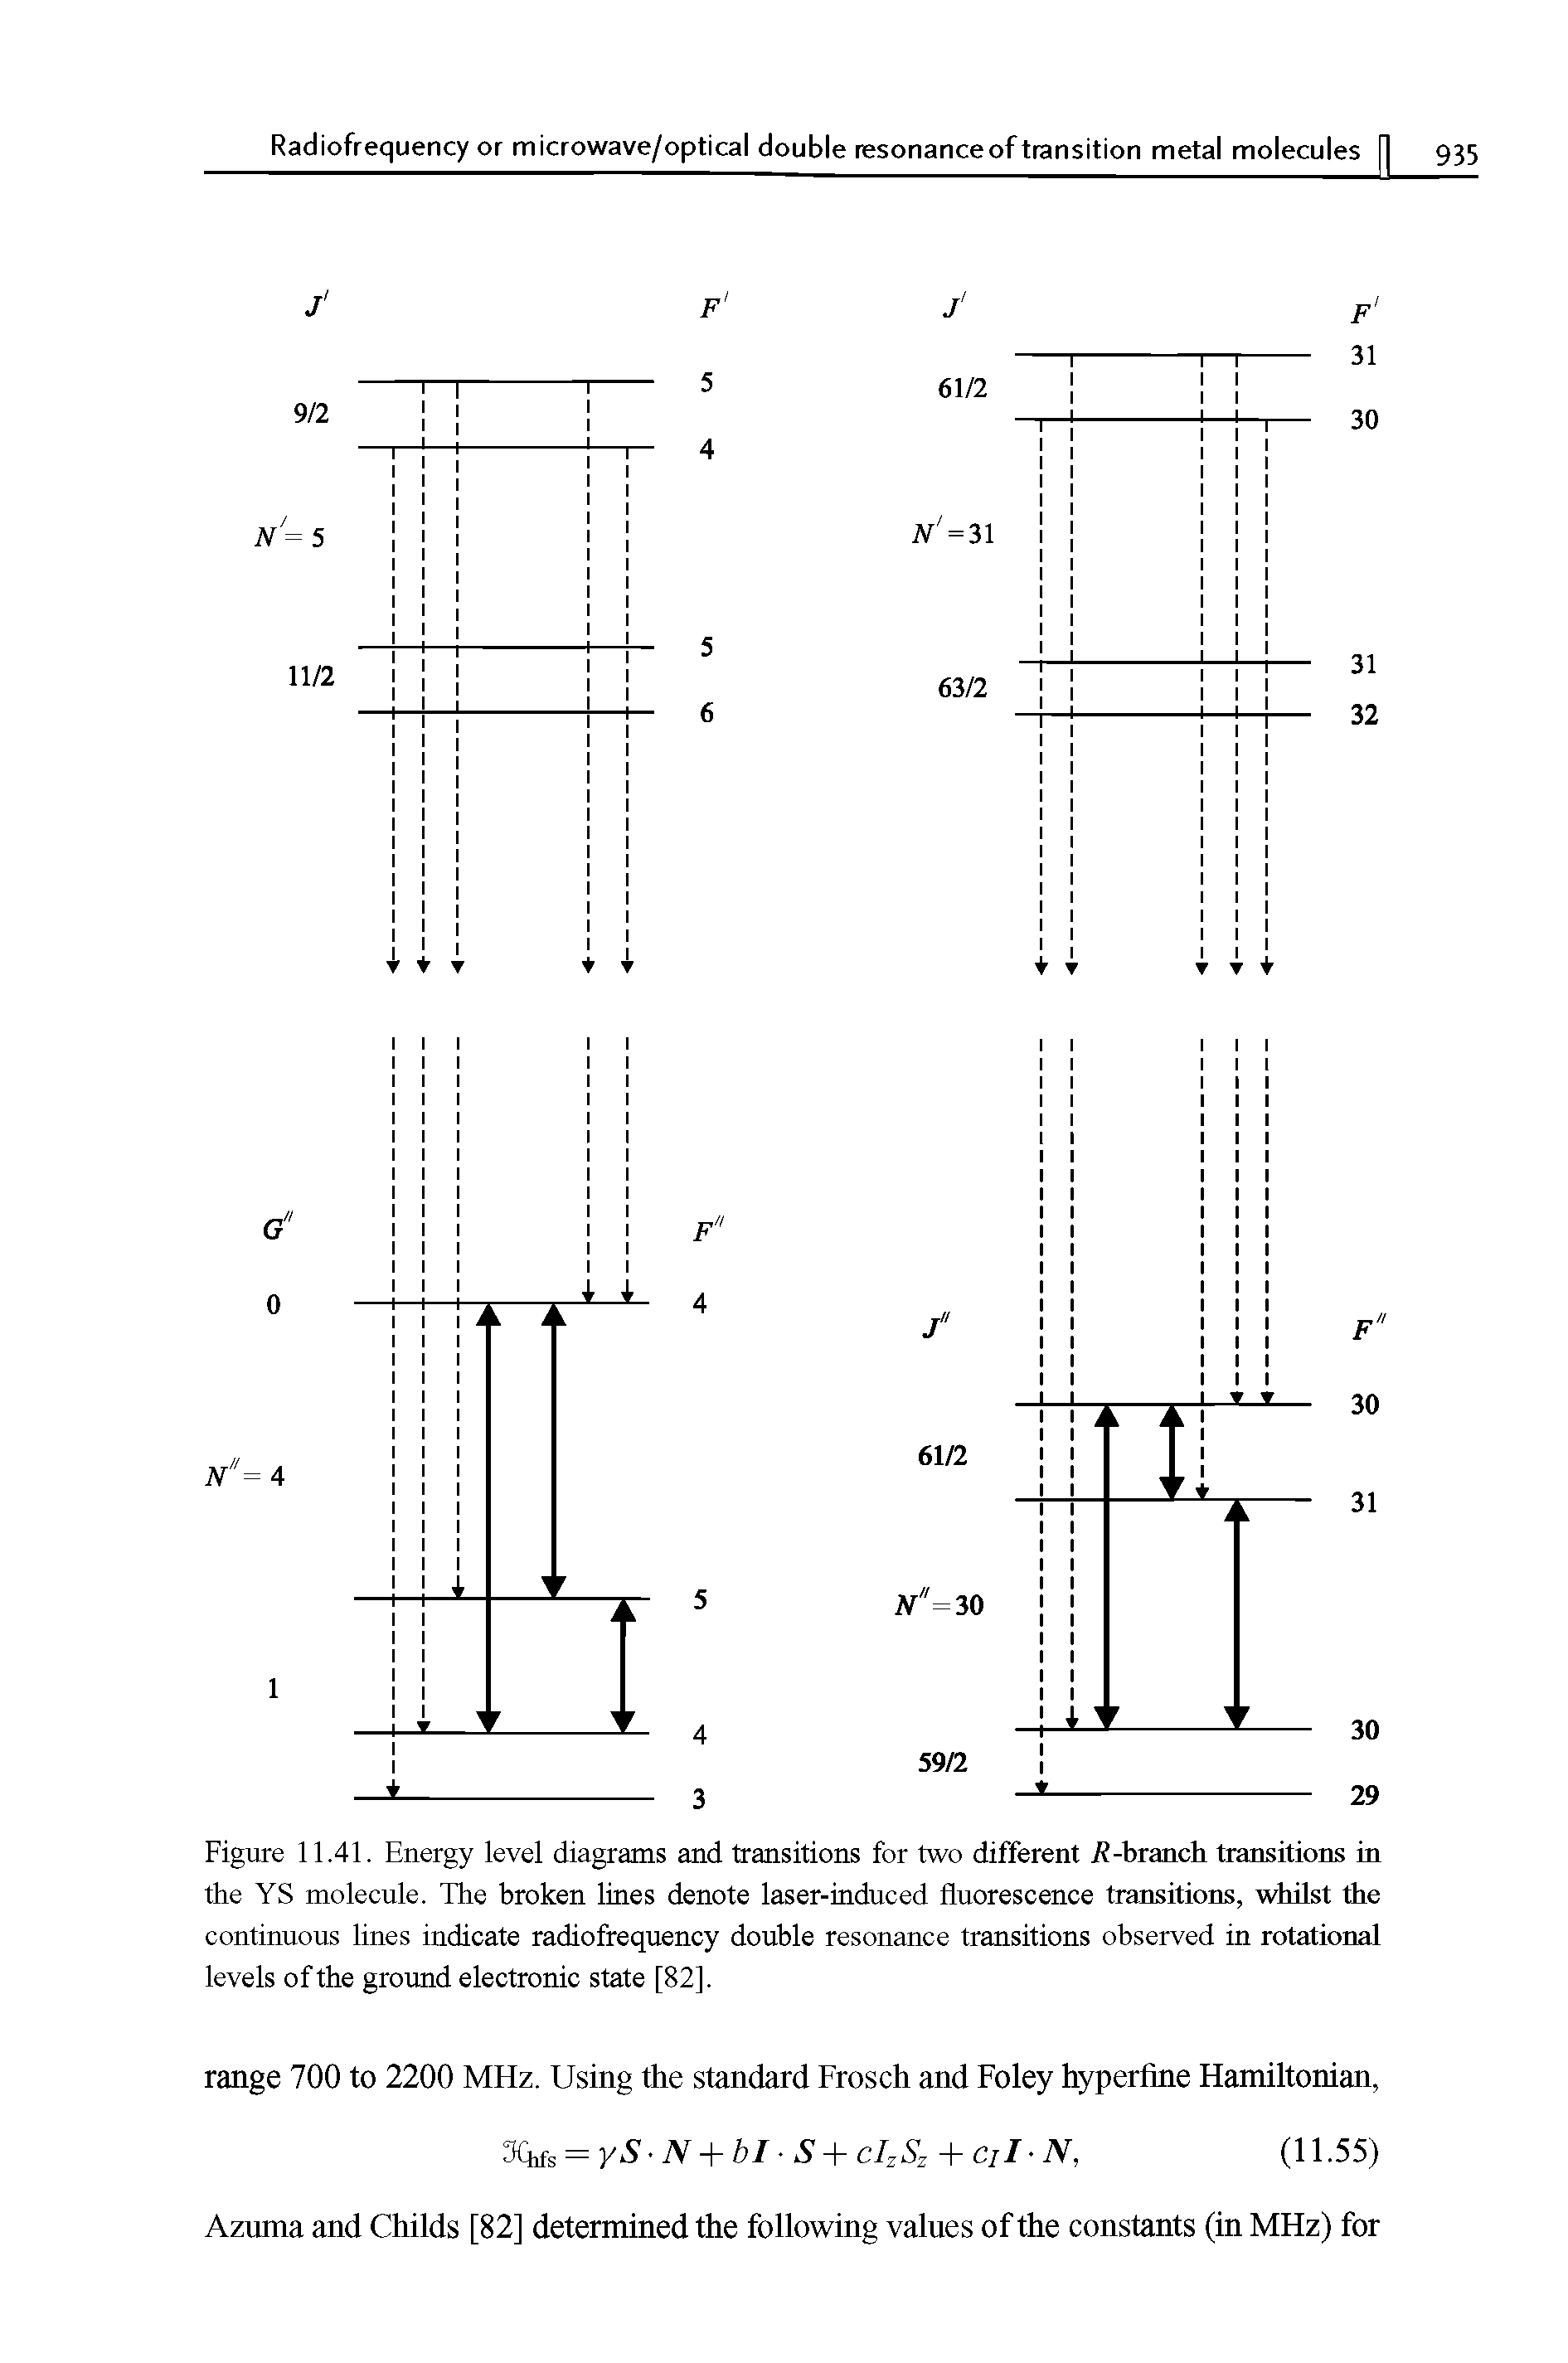 Figure 11.41. Energy level diagrams and transitions for two different F-branch transitions in the YS molecule. The broken lines denote laser-induced fluorescence transitions, whilst the continuous lines indicate radiofrequency double resonance transitions observed in rotational levels of the ground electronic state [82].